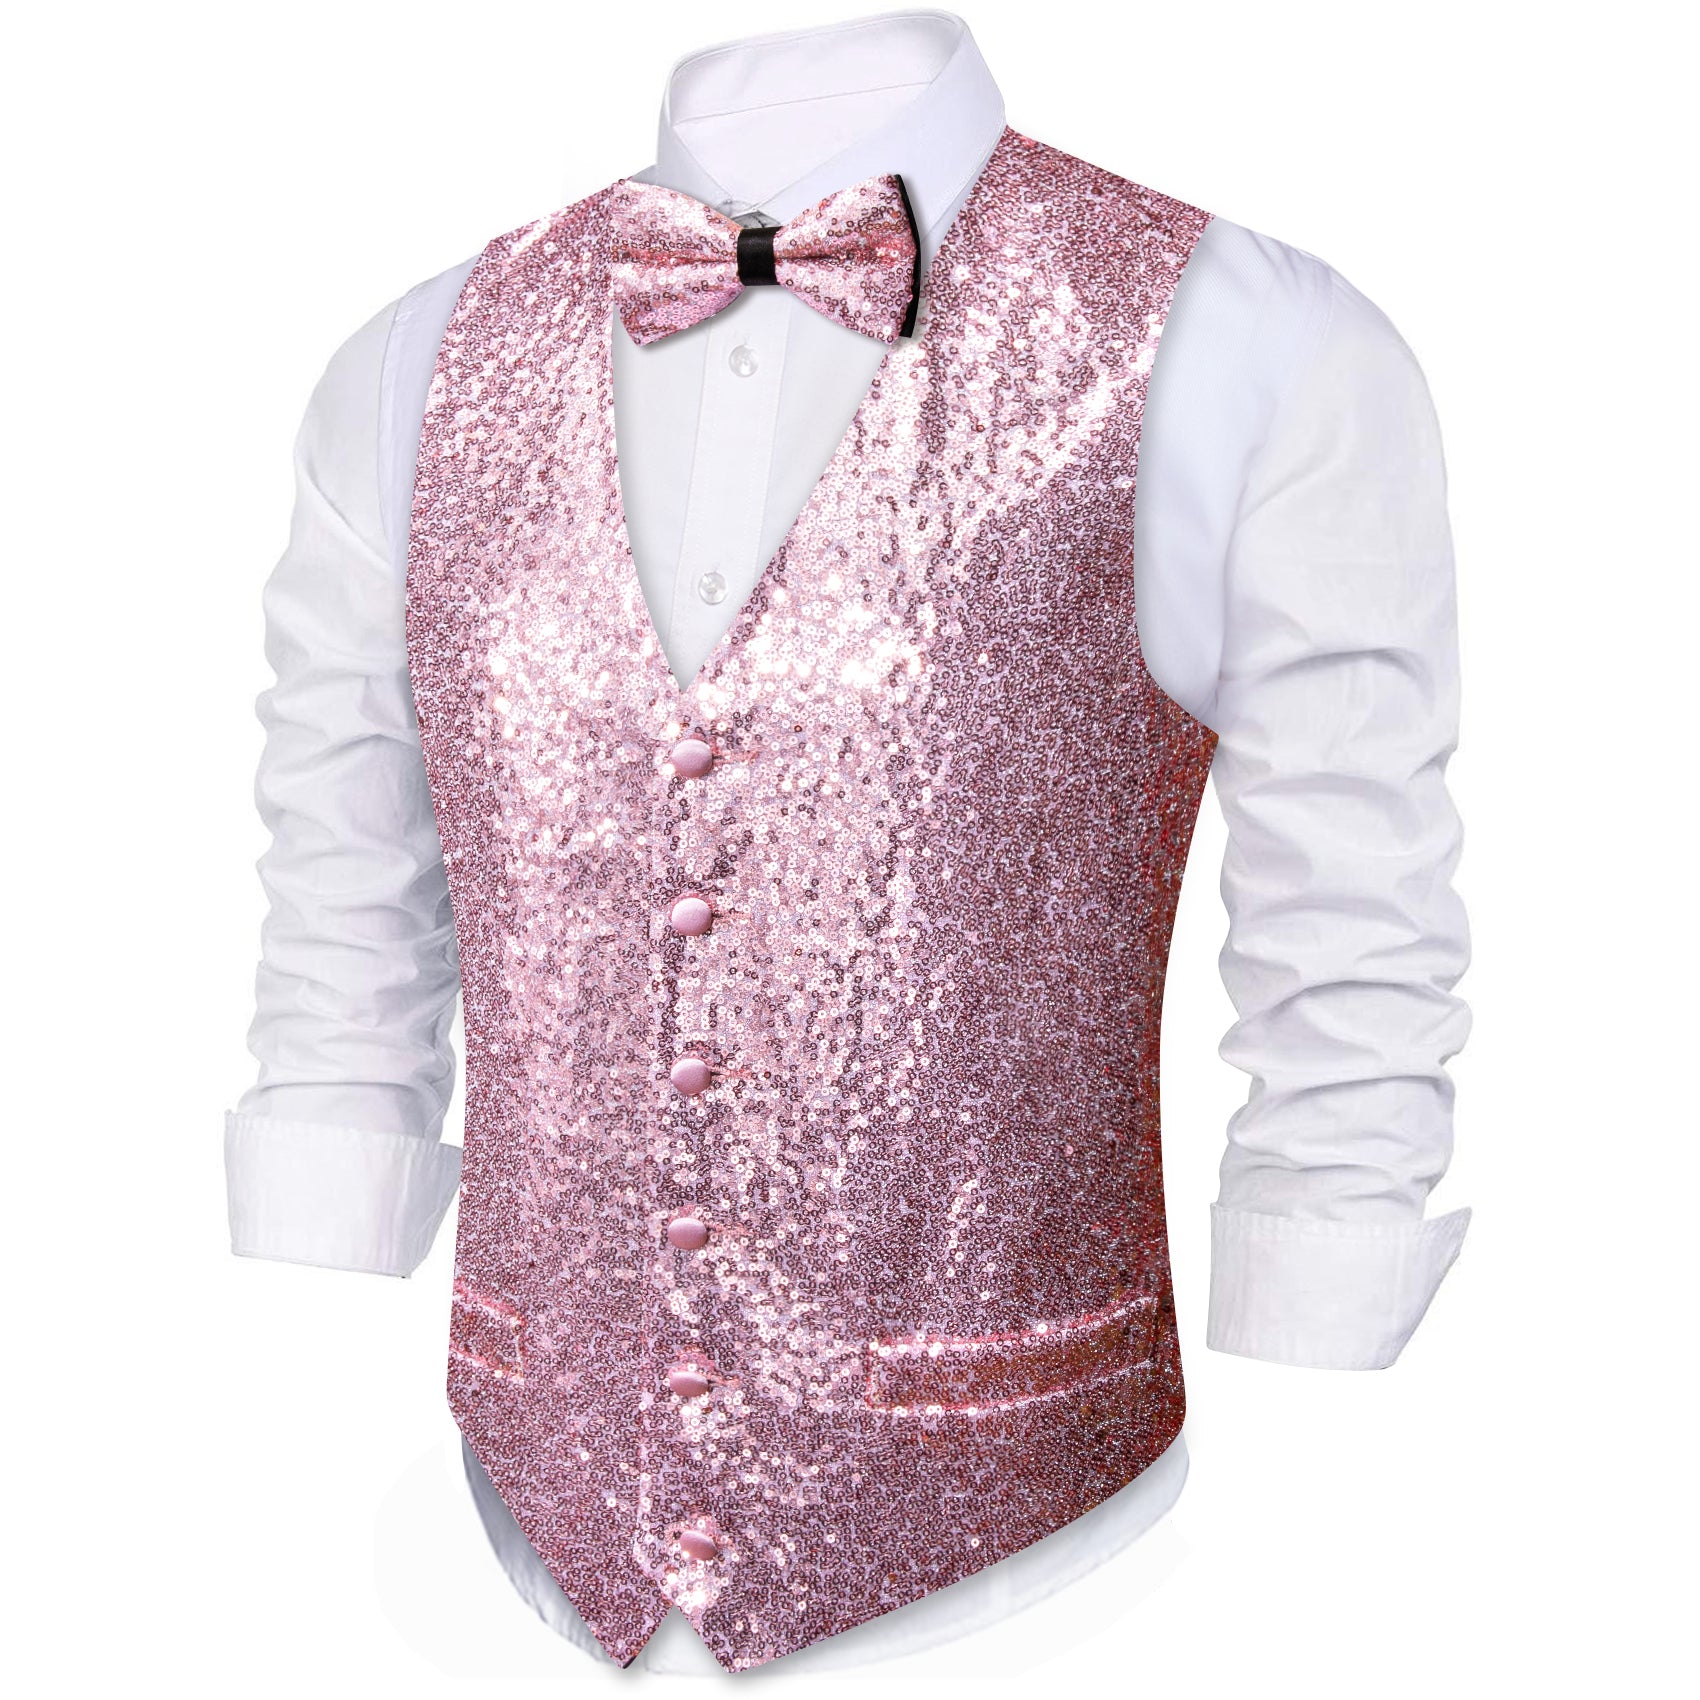 Barry.wang Men's Vest Pink Shining Bow tie Waistcoat Vest Set for Party